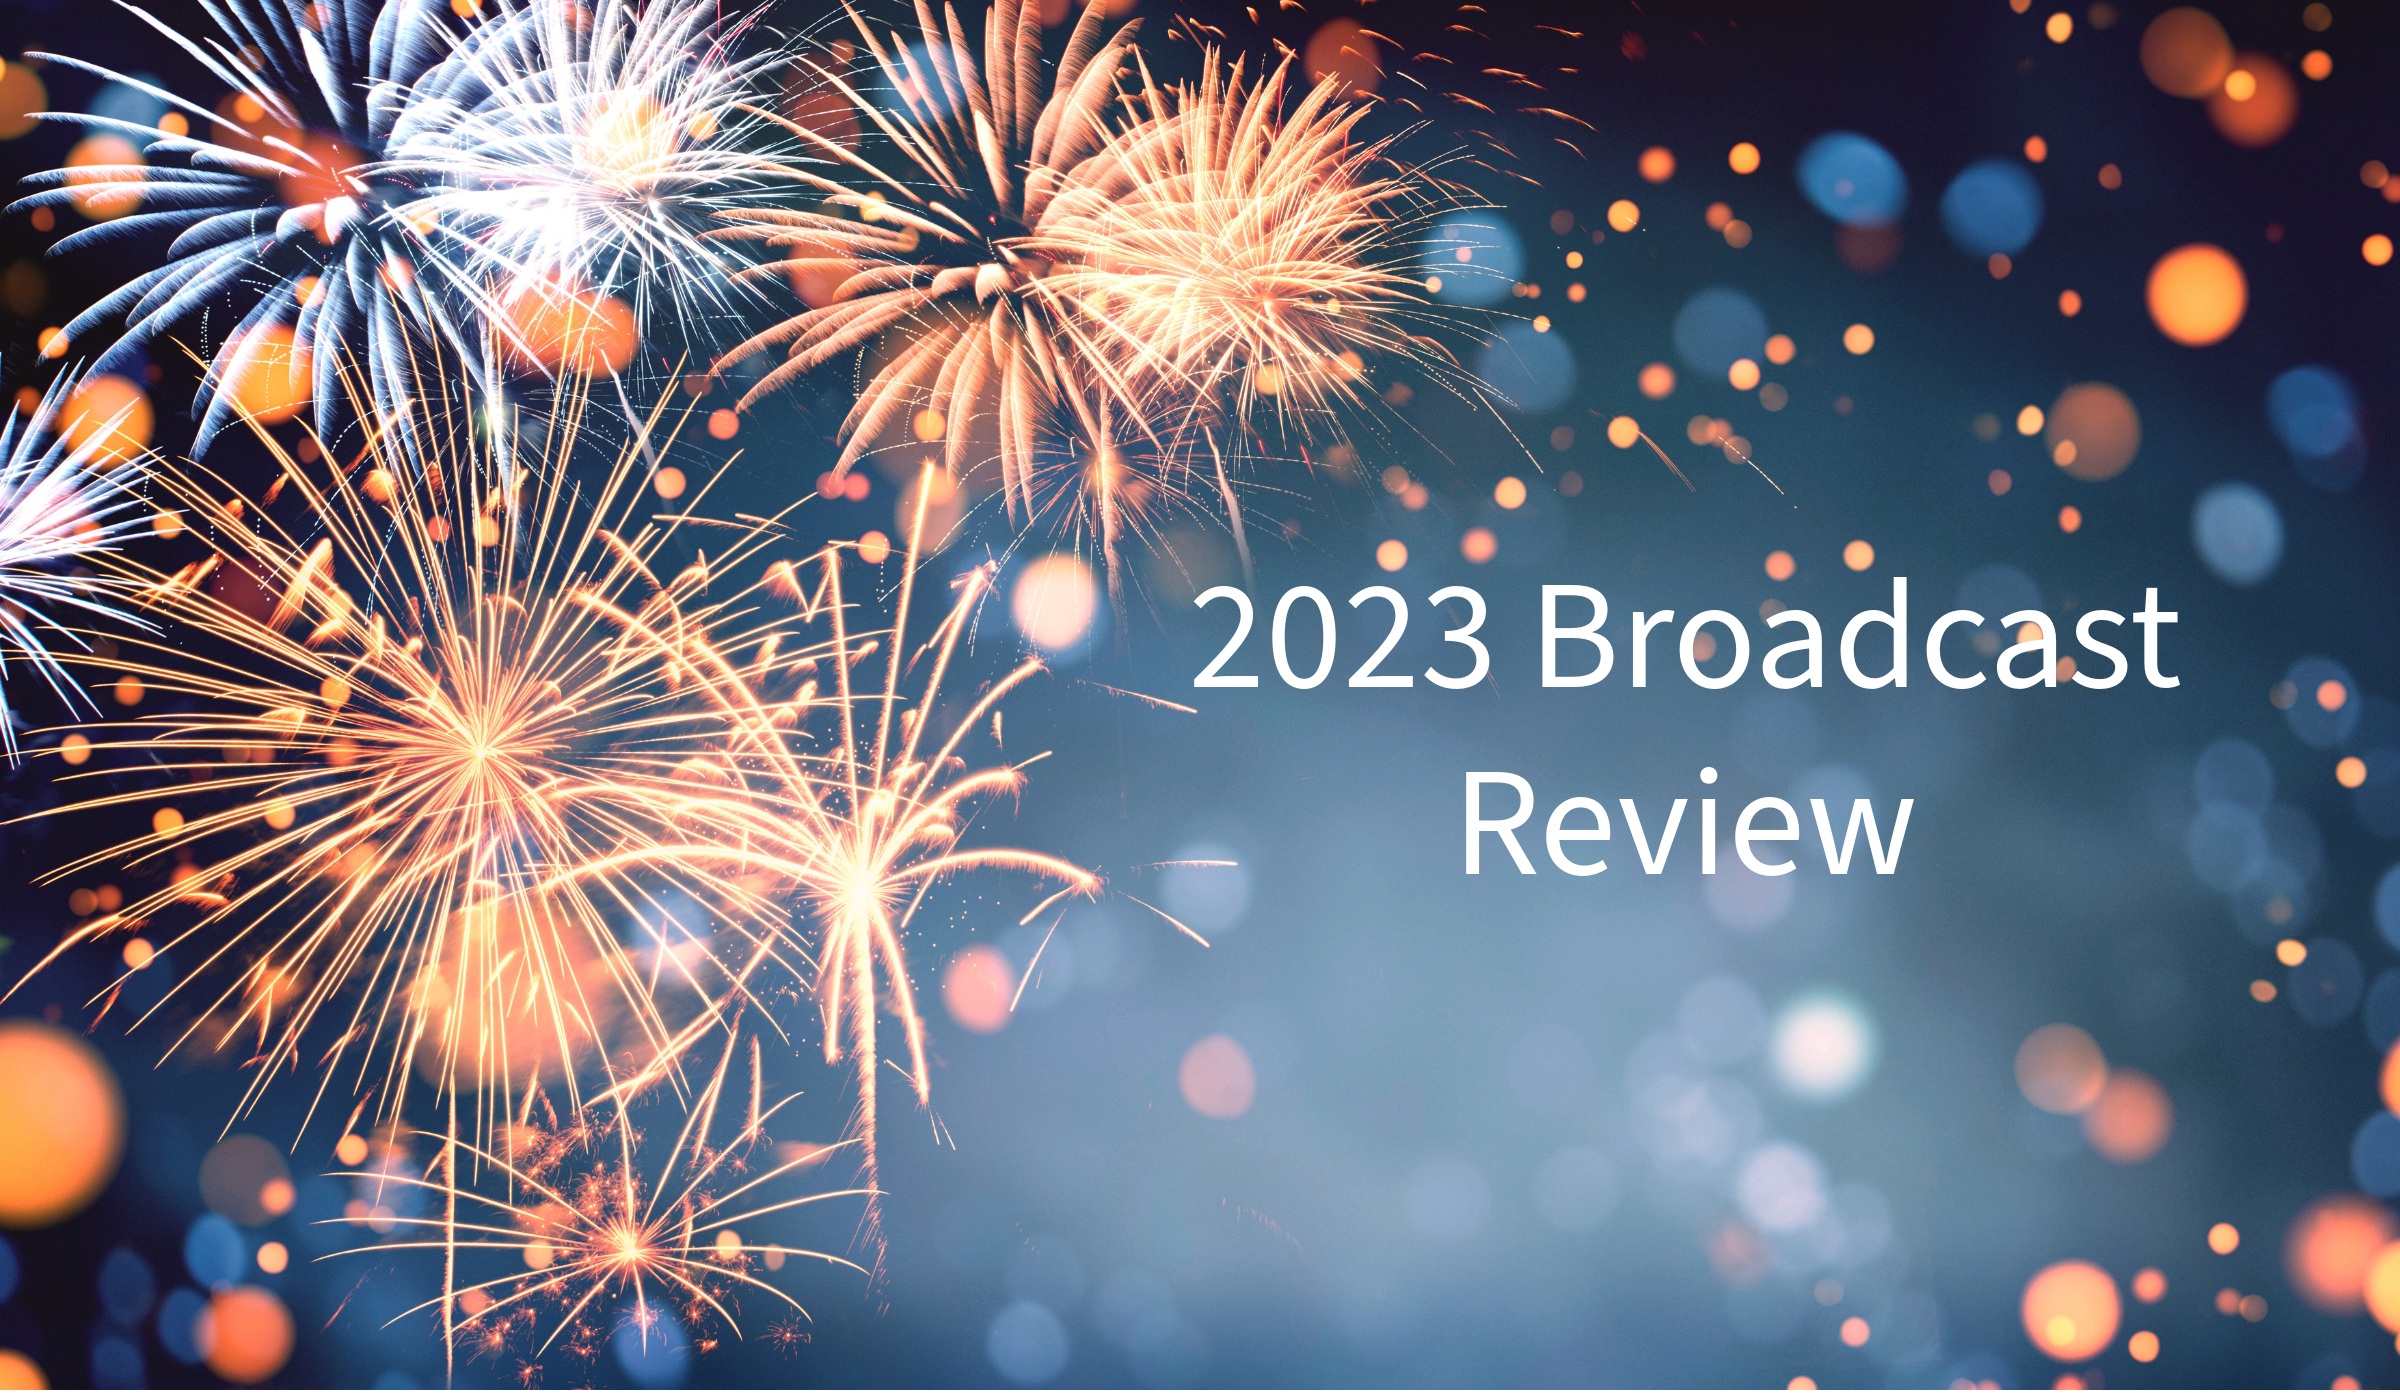 Broadcast PR news stories in 2023 - Shows a fireworks banner